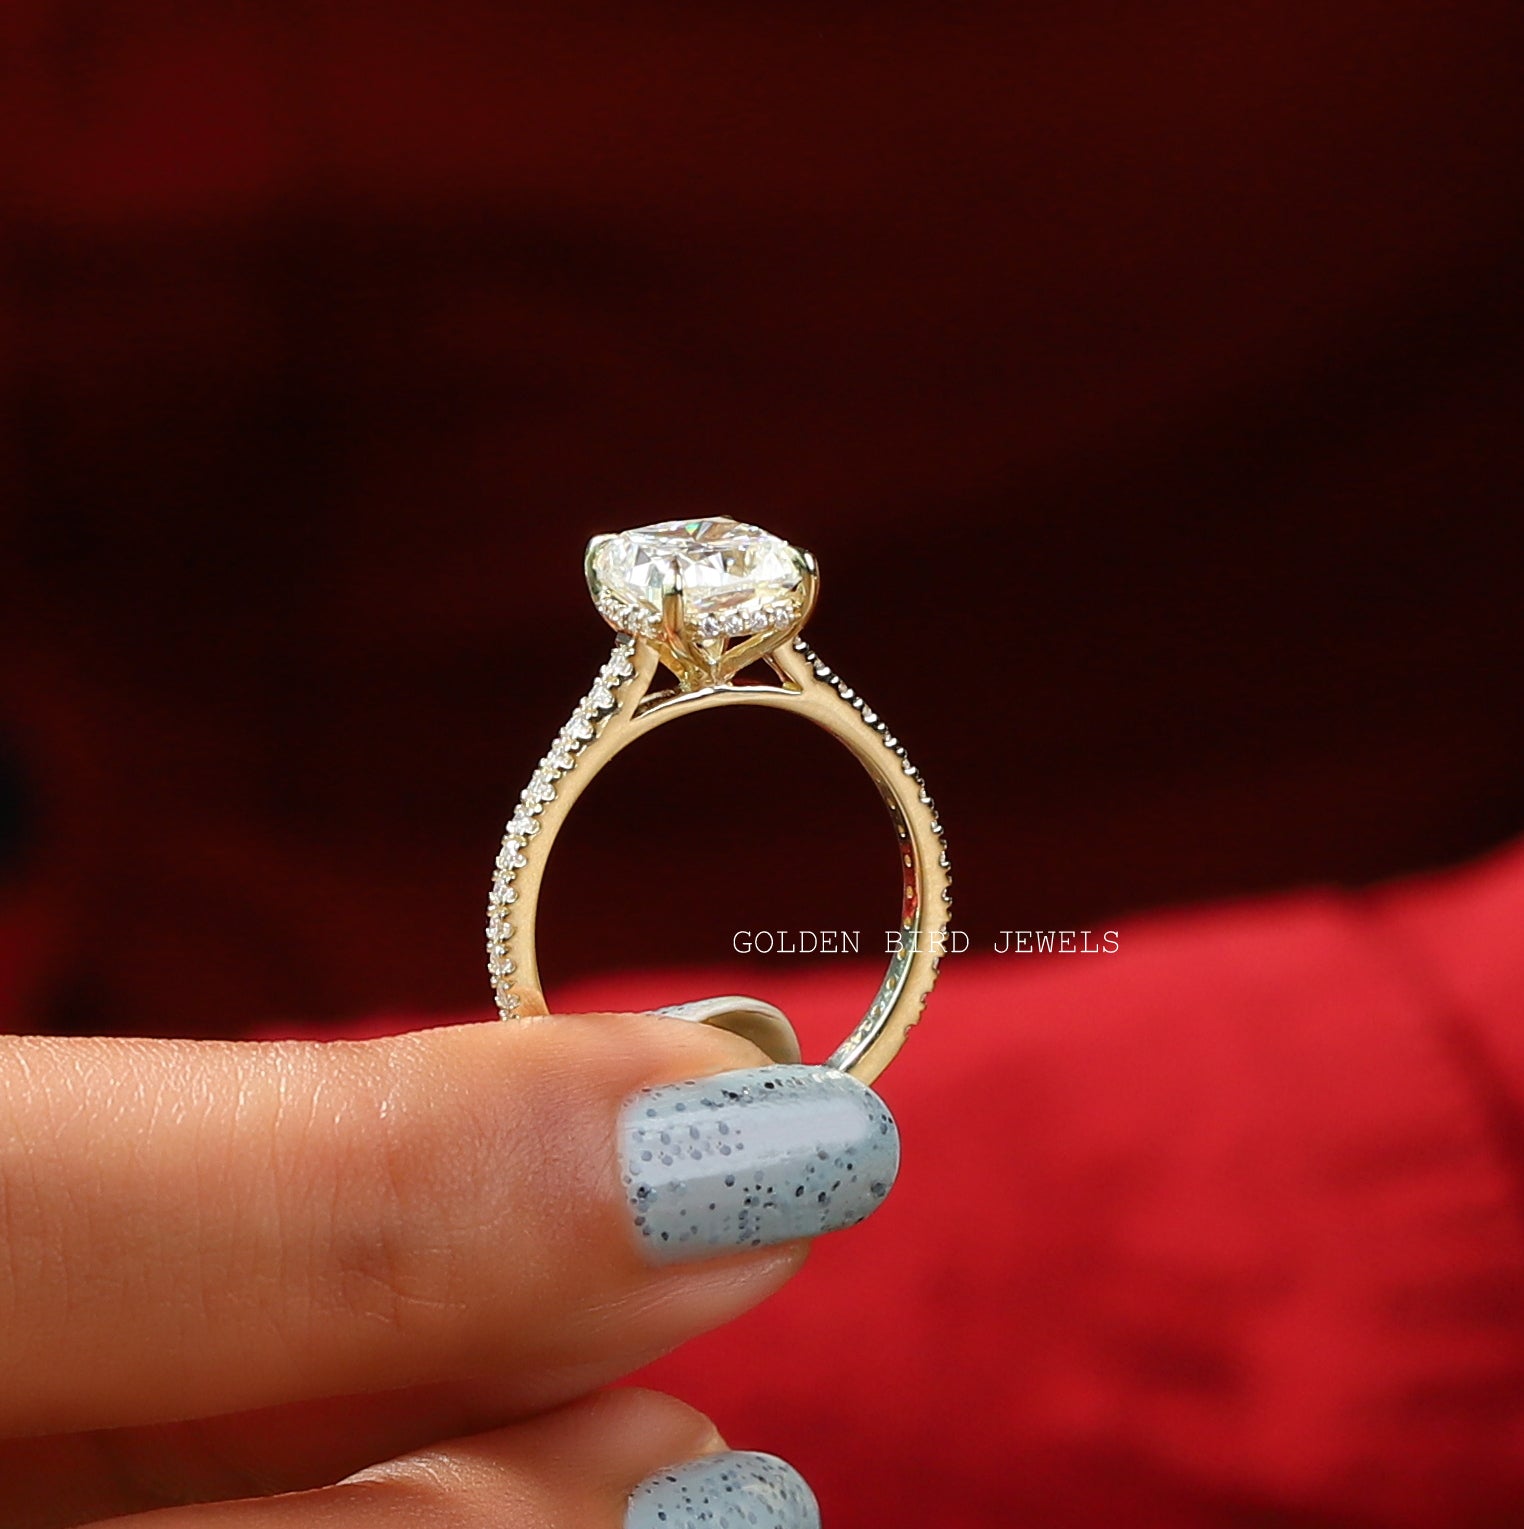 [Side View Of Antique Cushion Cut Moissanite Accent Stone Engagement Ring]-[Golden Bird Jewels]